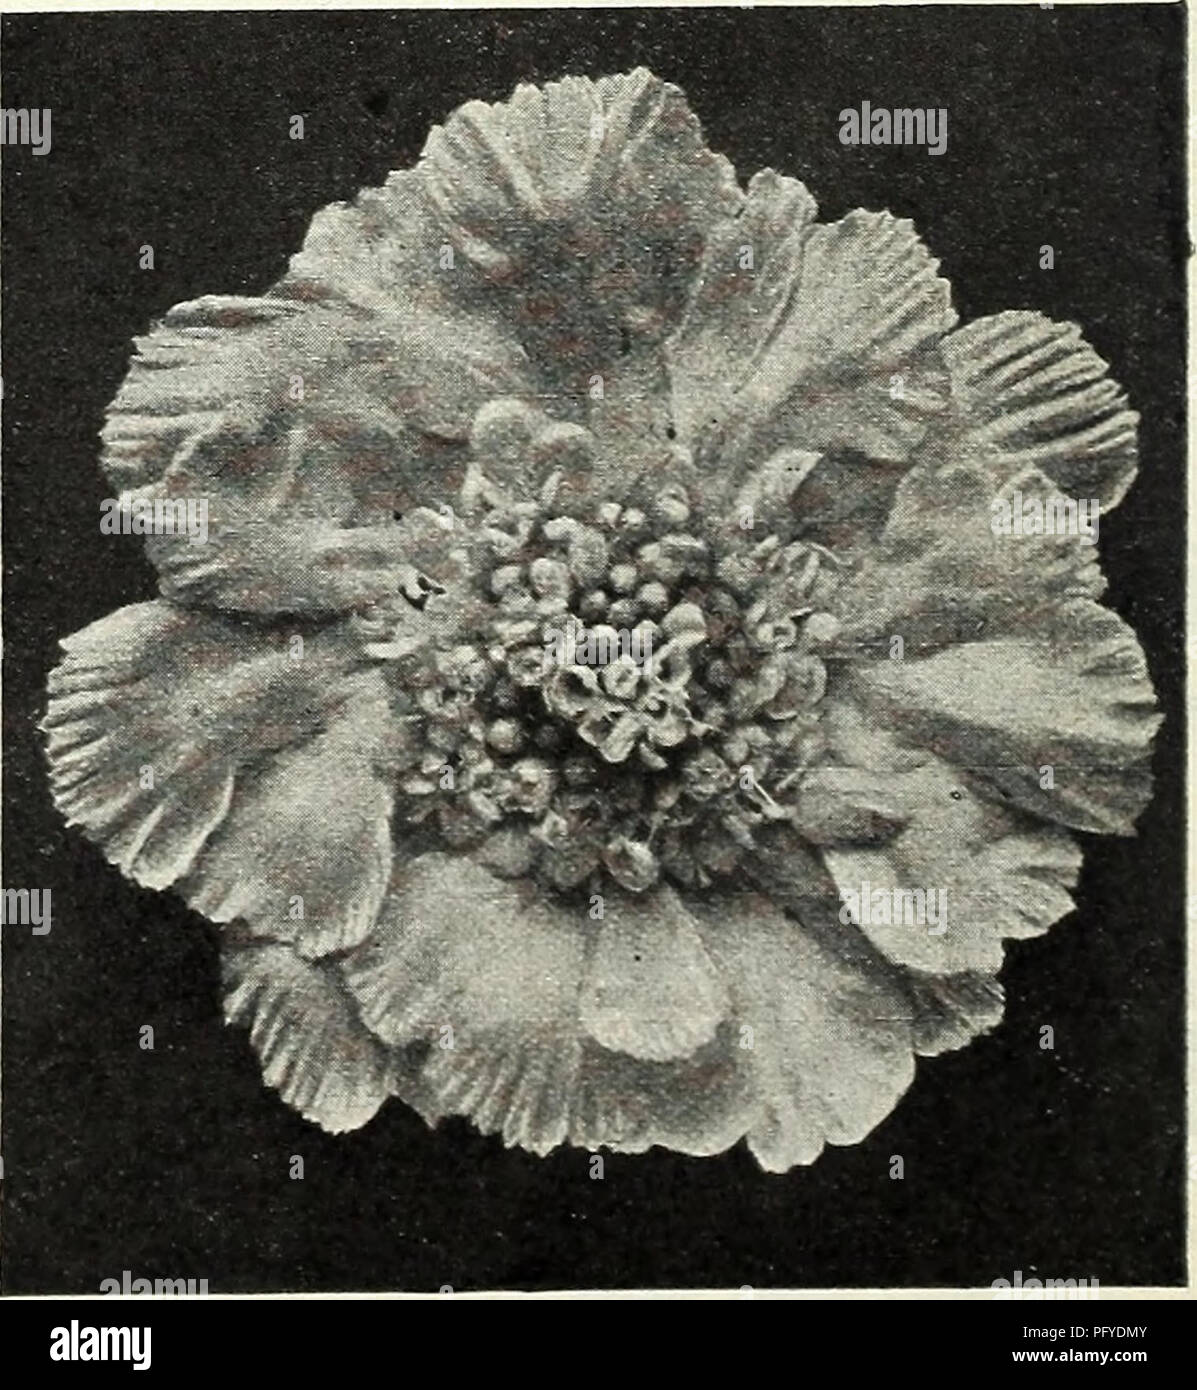 . Currie Bros. : fifty-eighth year 1933. Flowers Seeds Catalogs; Bulbs (Plants) Seeds Catalogs; Vegetables Seeds Catalogs; Nurseries (Horticulture) Catalogs; Plants, Ornamental Catalogs; Gardening Equipment and supplies Catalogs. NEW VERBENA BEAUTY OF OXFORD HYBRIDS (HYBRIDA GRANDIFLORA TYPE). A beautiful giant hybrid raised from a cross between Ver- bena Luminosa and Beauty of Ox- ford. While following closely the color of Beauty of Oxford, it also inherits a touch of salmon pink from Luminosa which gives a love- ly softening effect to the sometimes harsh coloring of Beauty of Oxford. The col Stock Photo